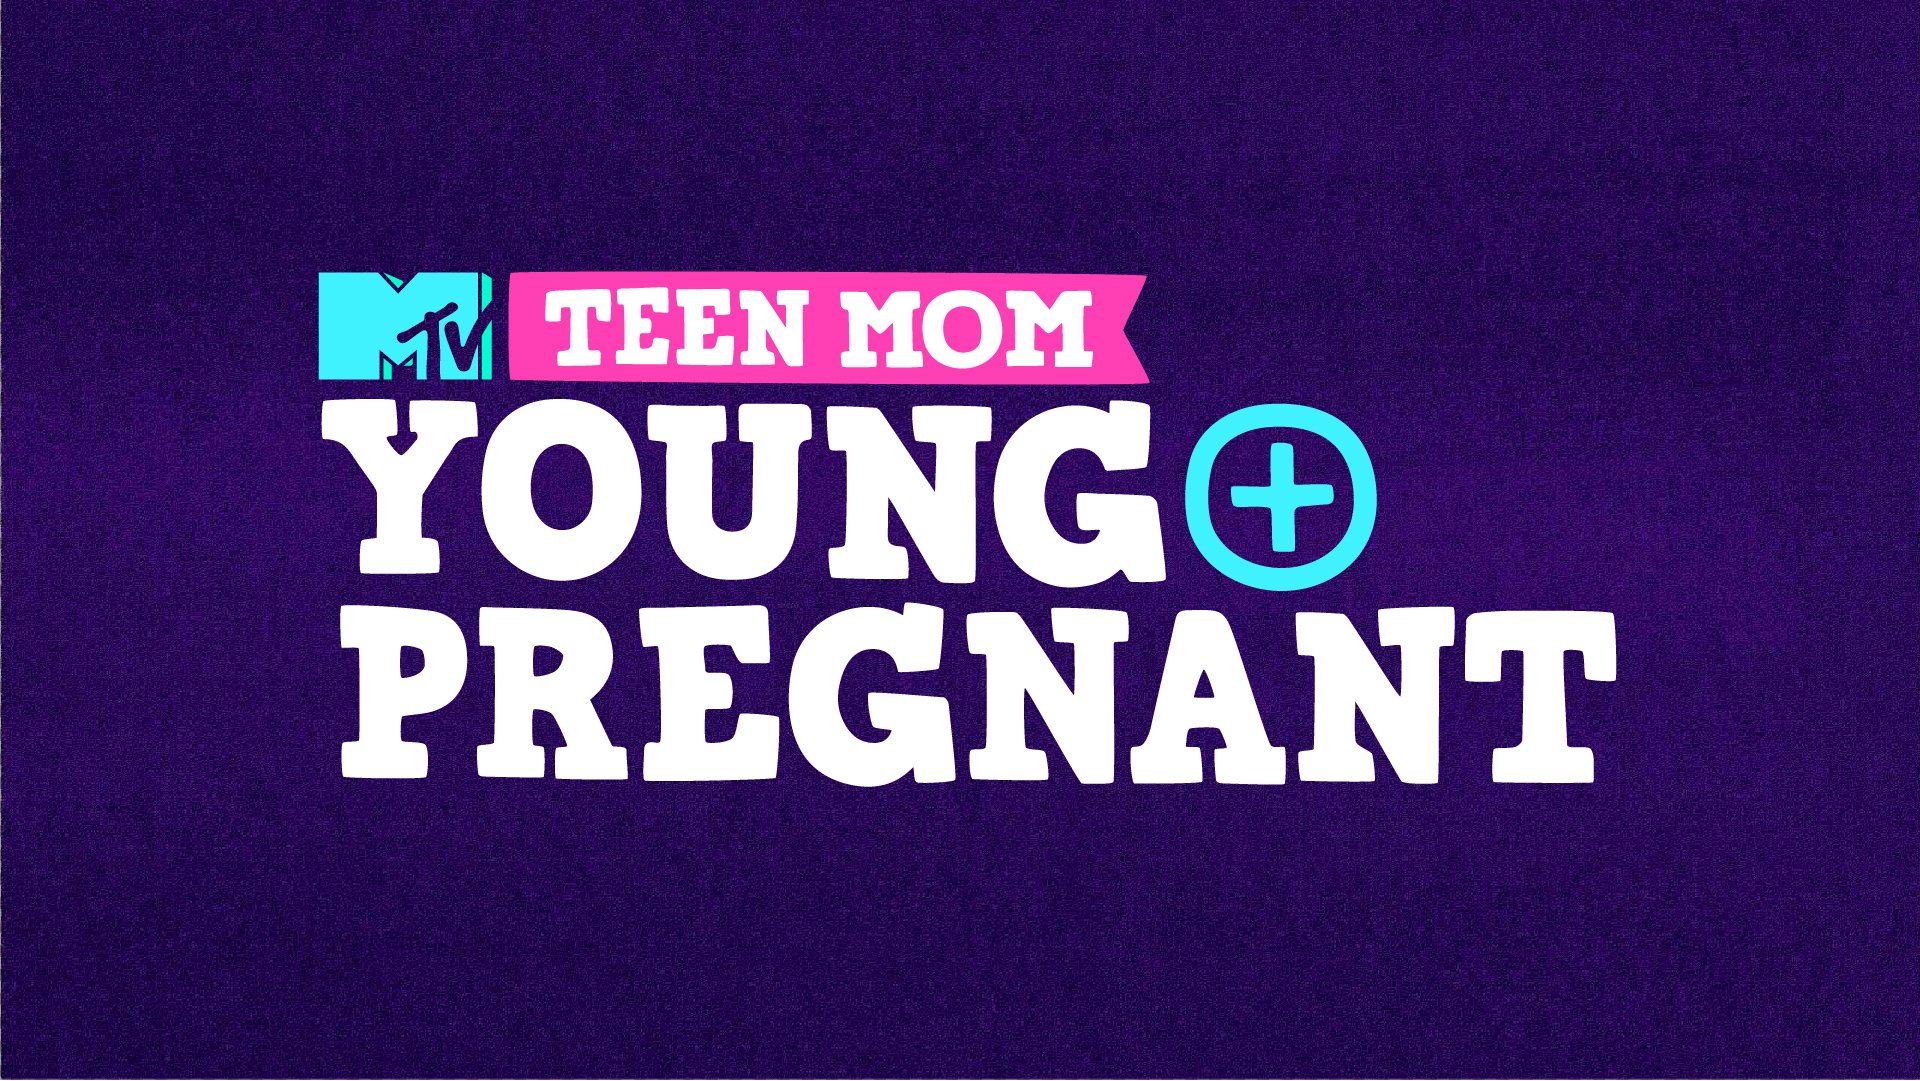 The logo for 'Teen Mom: Young and Pregnant'